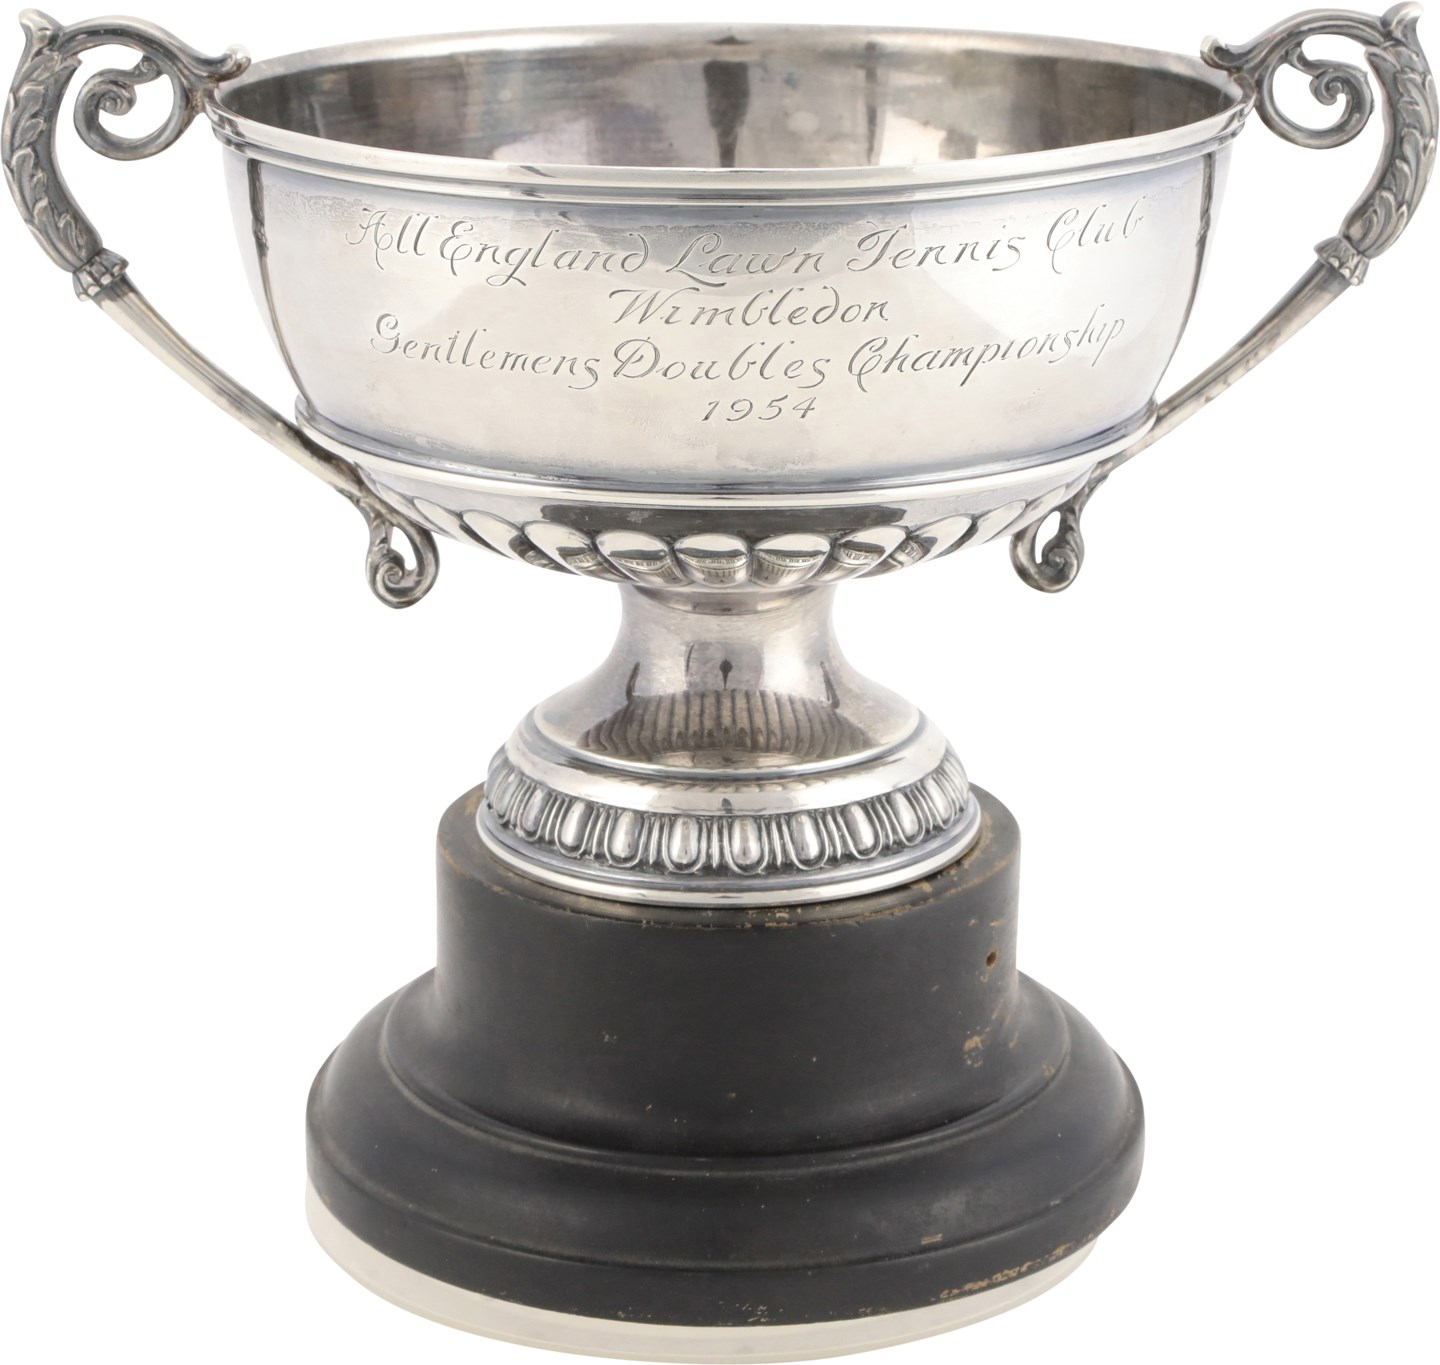 Olympics and All Sports - 1954 Wimbledon Doubles Championship Trophy Presented to Mervyn Rose